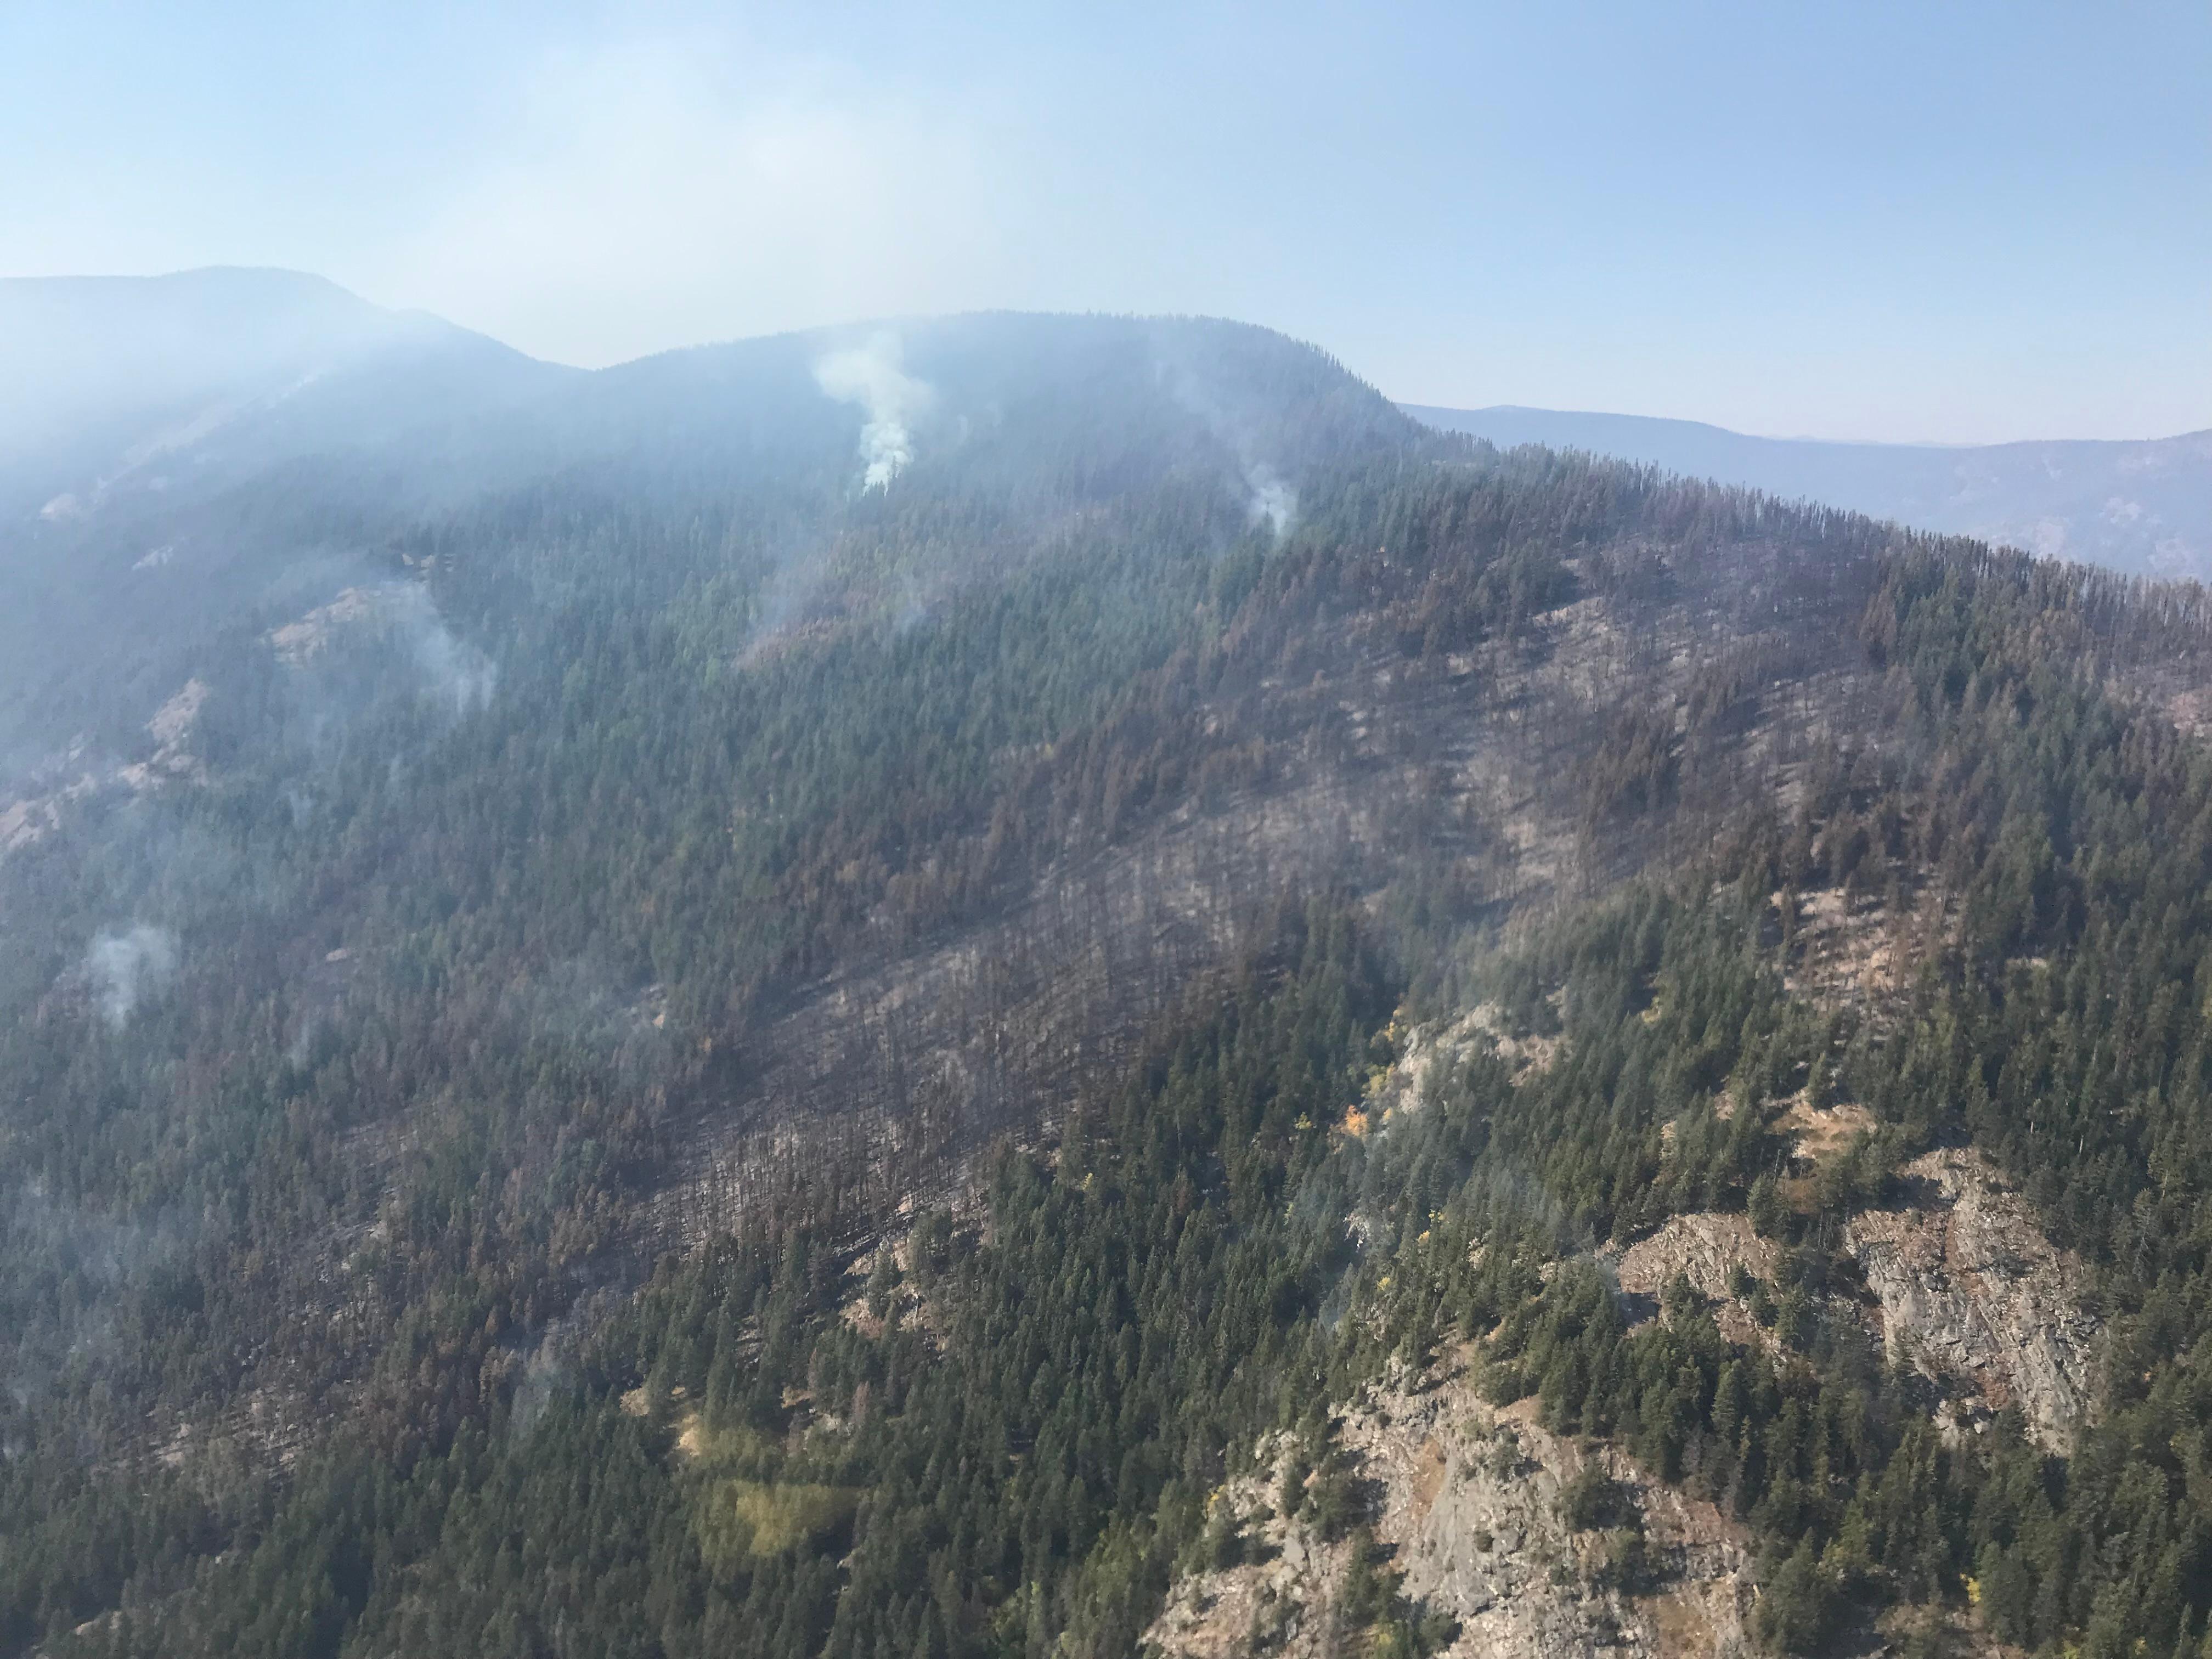 The Long Canyon Fire showed minimal fire activity on October 2.